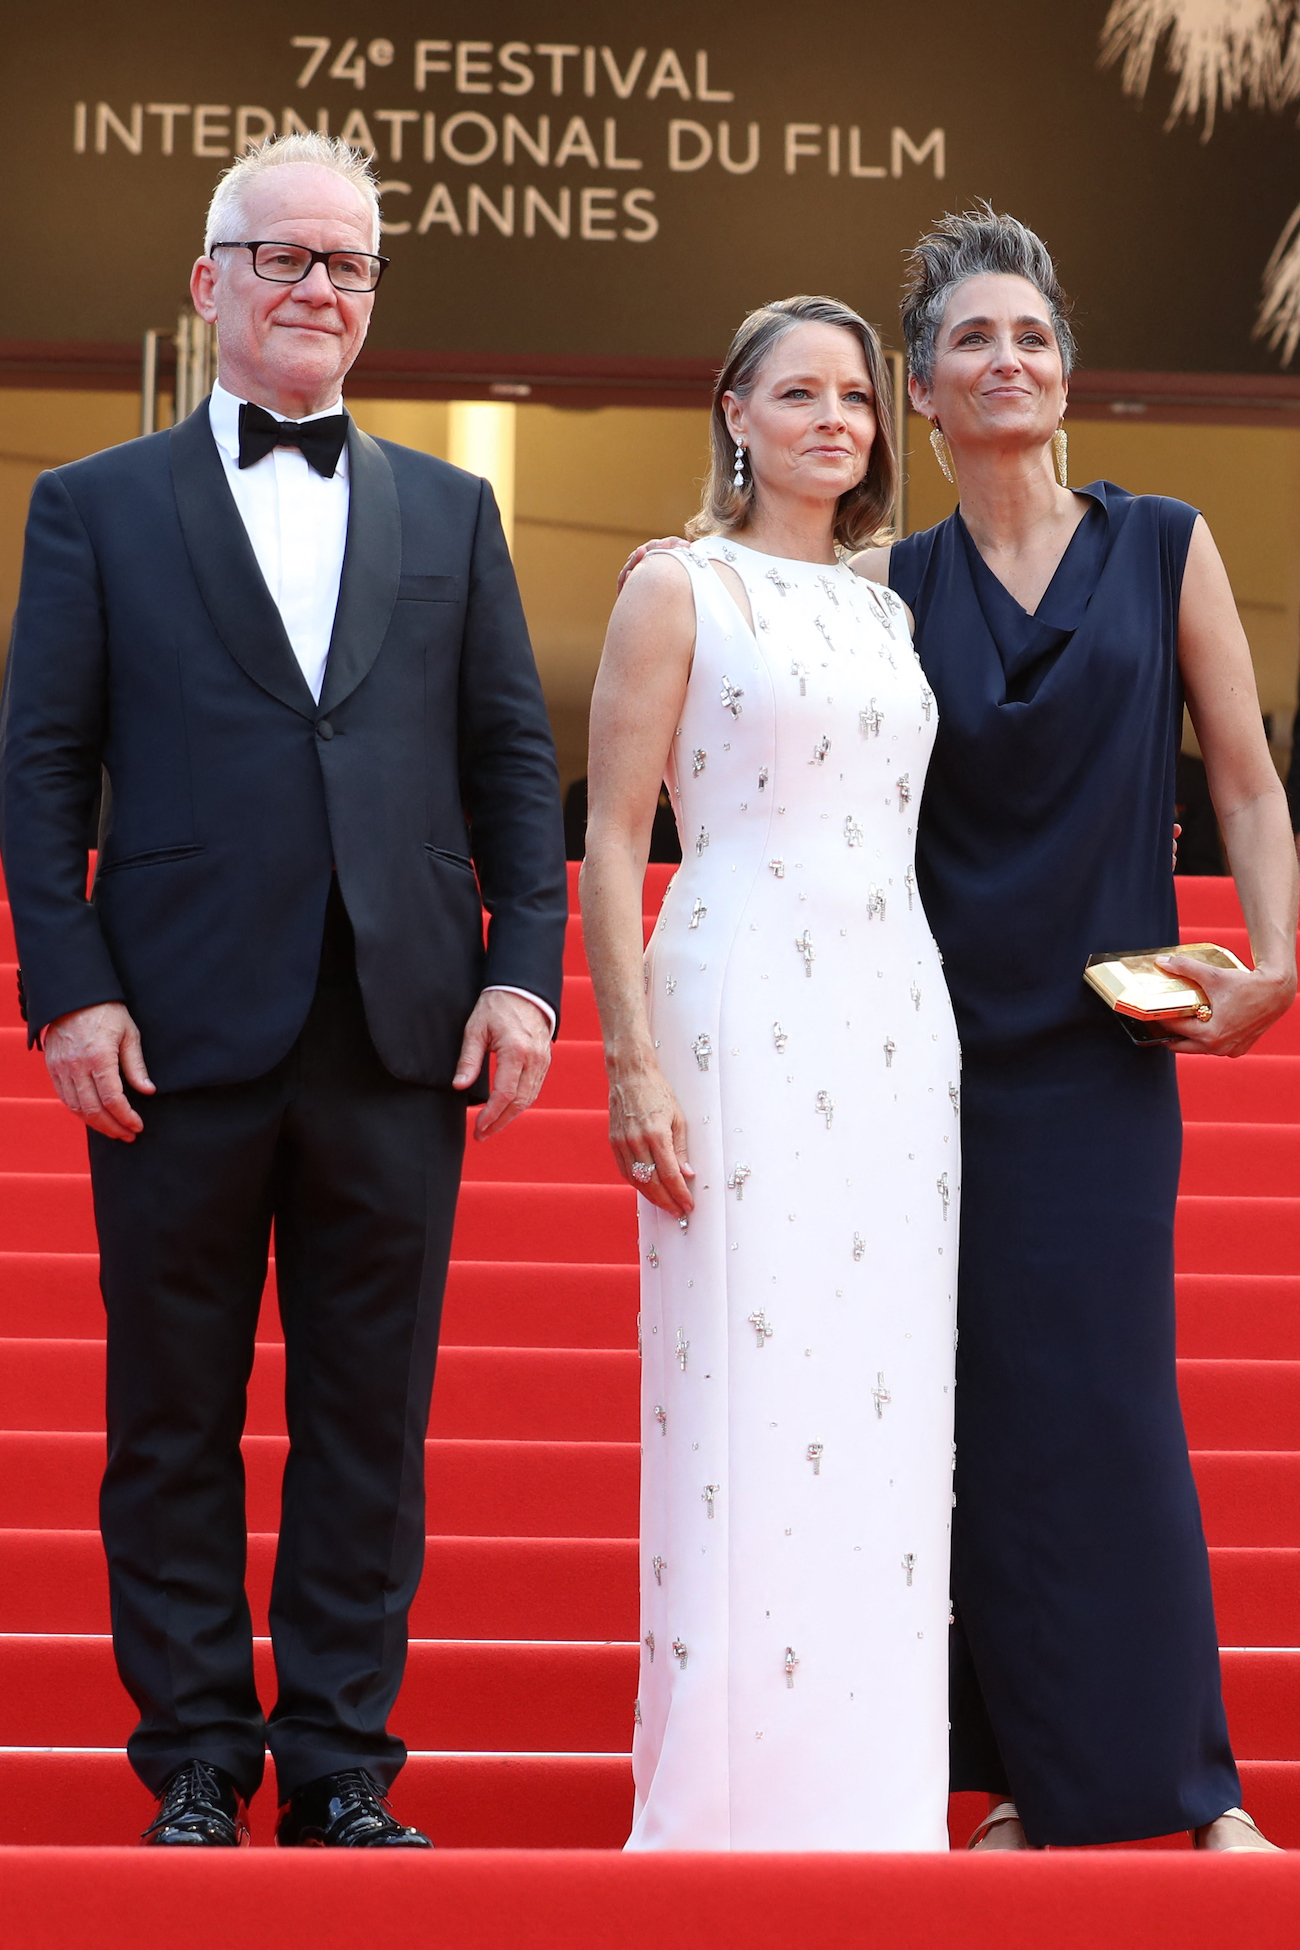 jodie_foster_son_epouse_alexandra_hedison_et_thierry_fremaux_cannes_60e563f260679.jpg